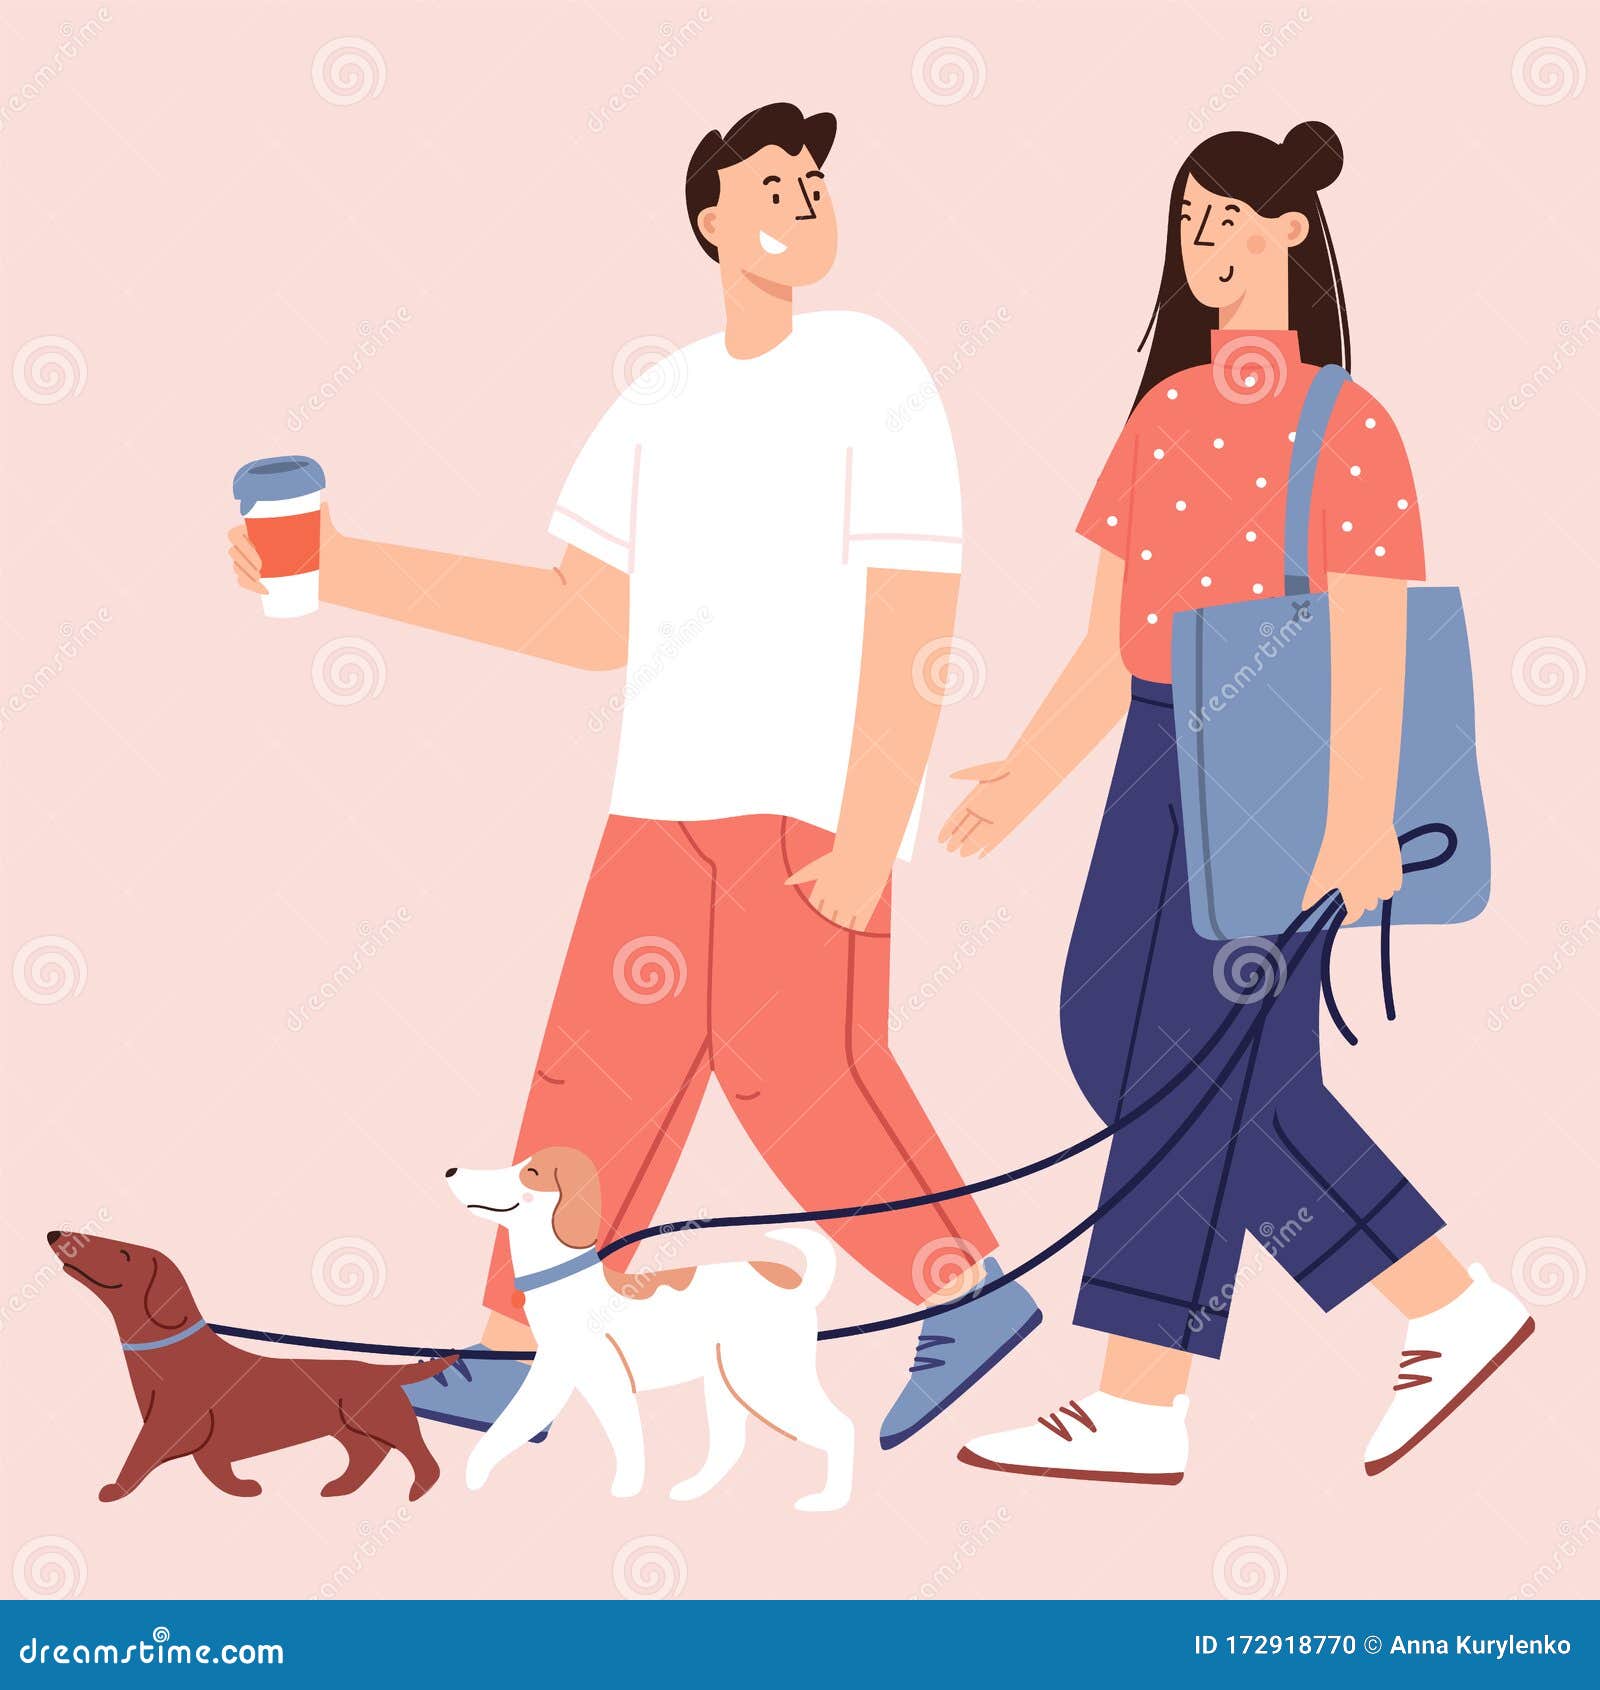 Flat Cartoon Vector Illustration about Human and Dogs Friendship Stock  Vector - Illustration of domestic, obey: 172918770